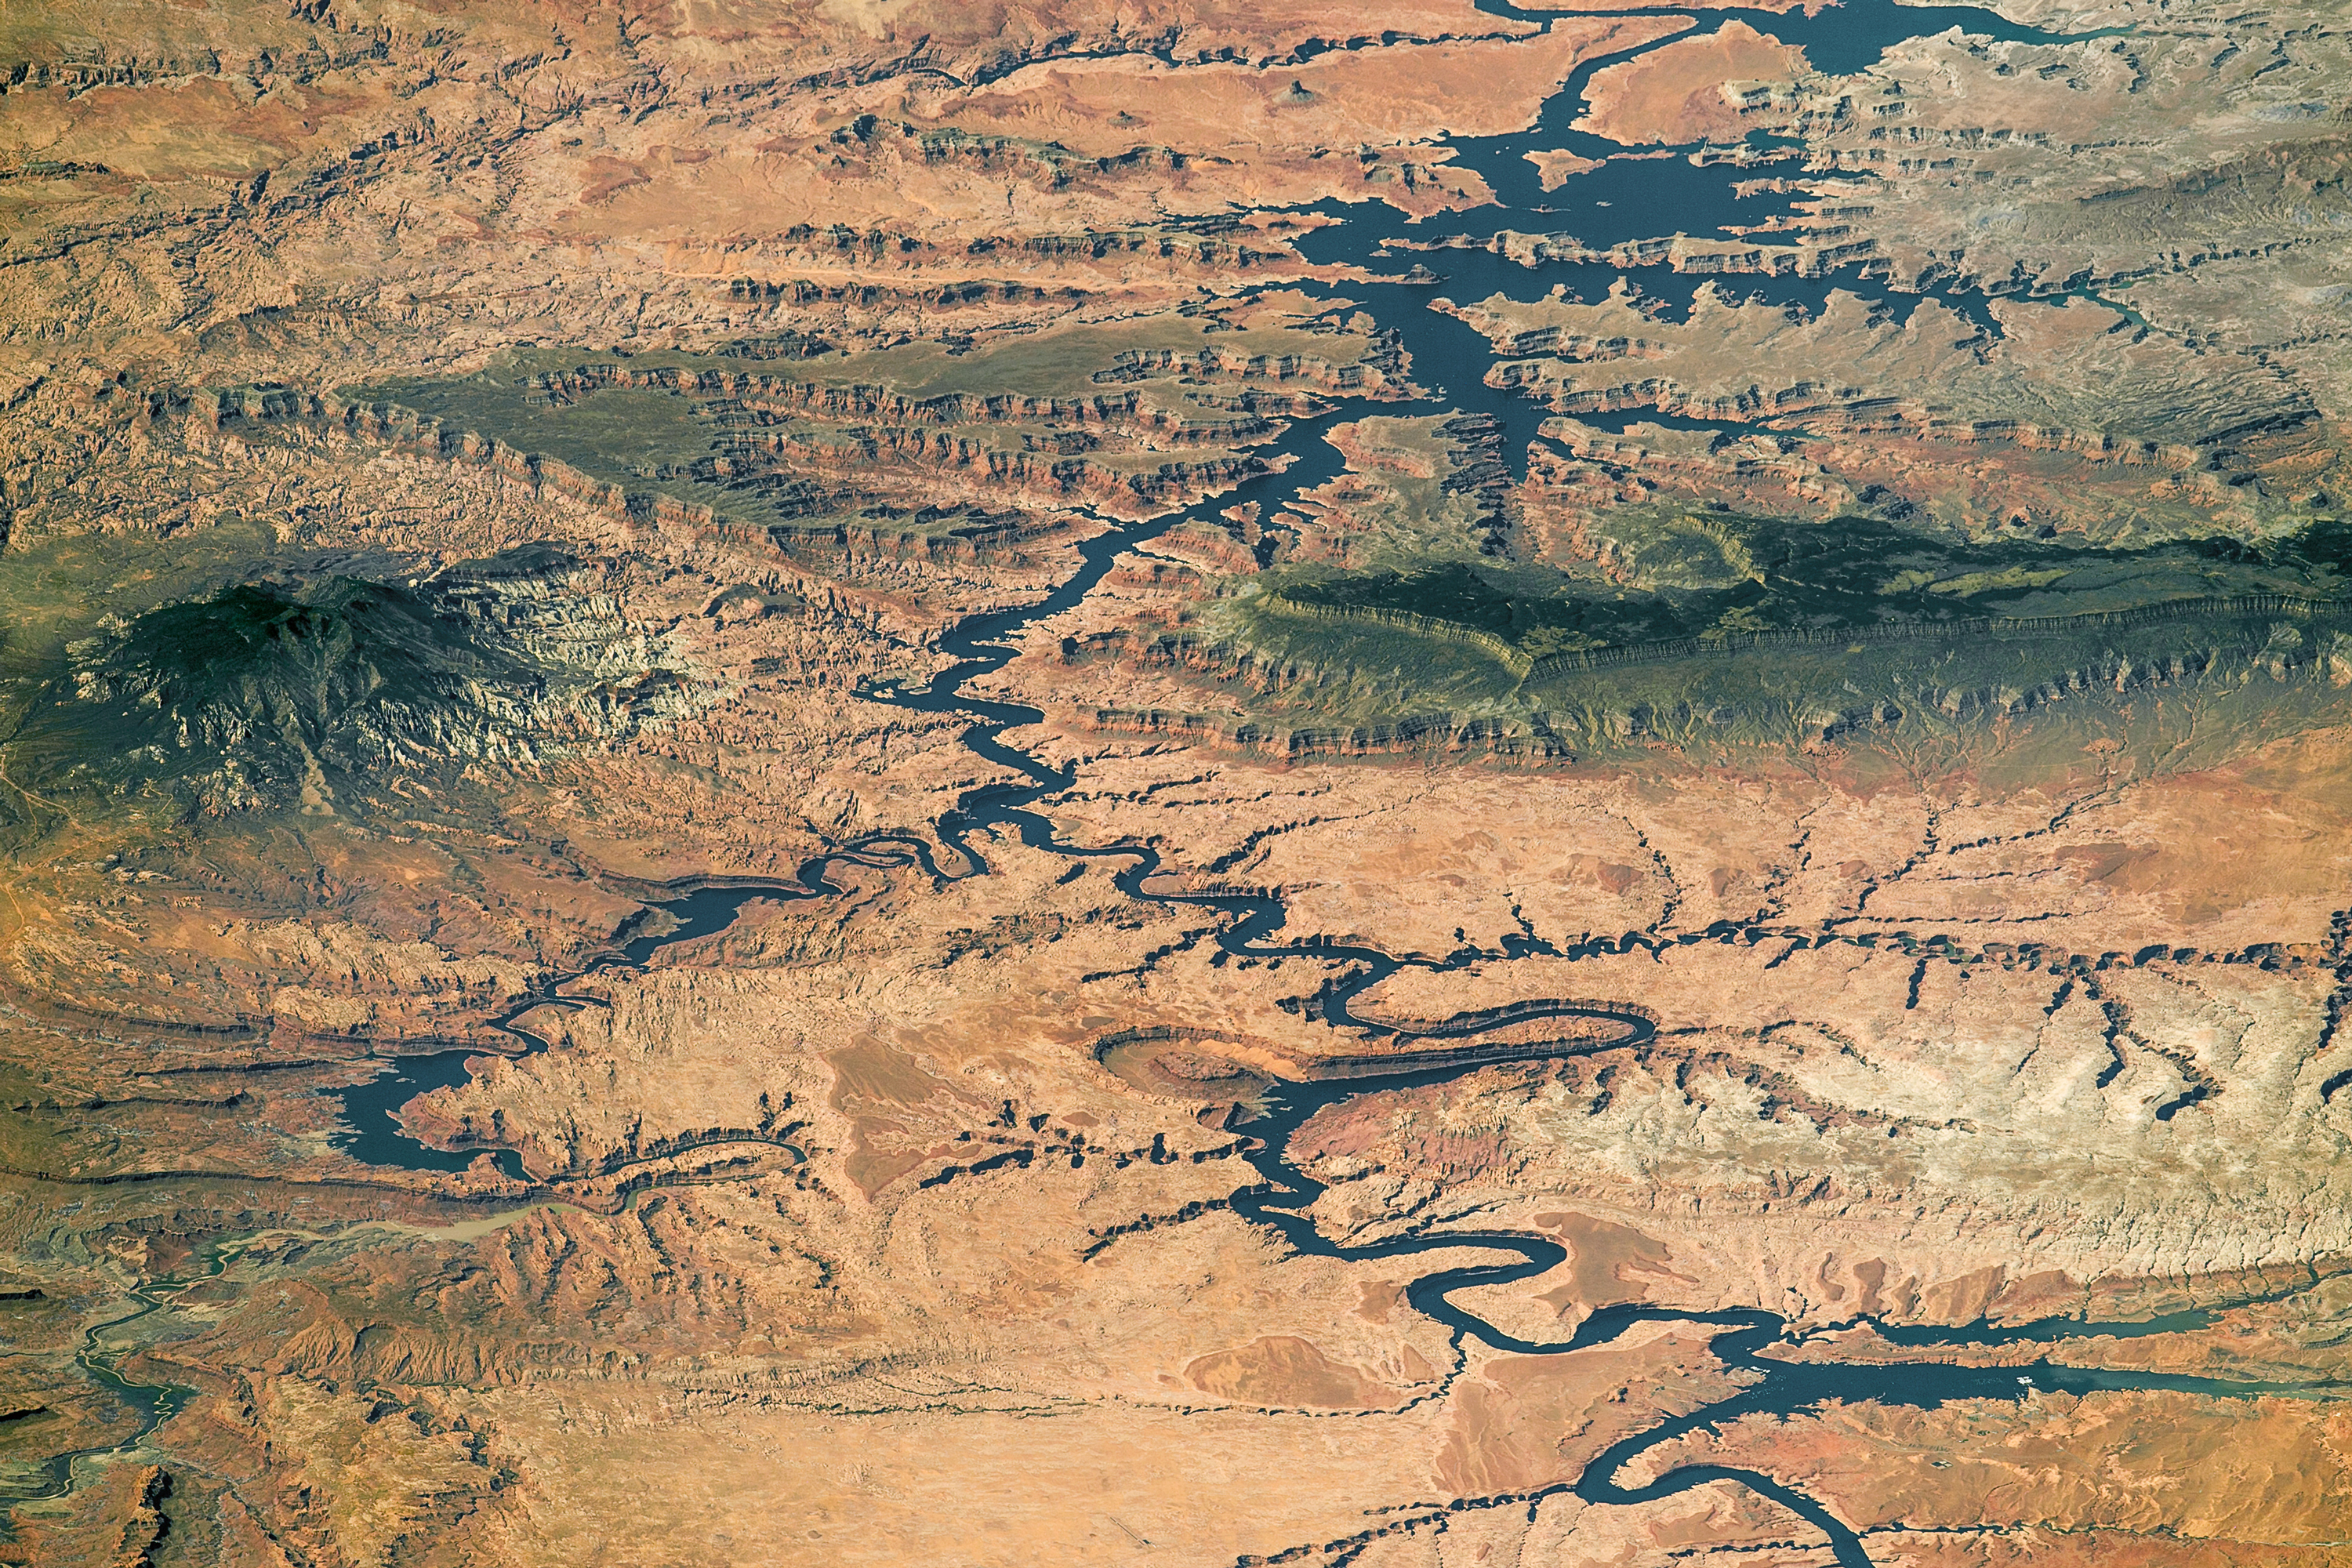 This panorama showing nearly the full length of Lake Powell in southern Utah and northern Arizona was photographed by an astronaut aboard the International Space Station, on Sept. 6, 2016. The station was north of the lake at the time, so south is at the top left of the image. (Source: NASA Earth Observatory)